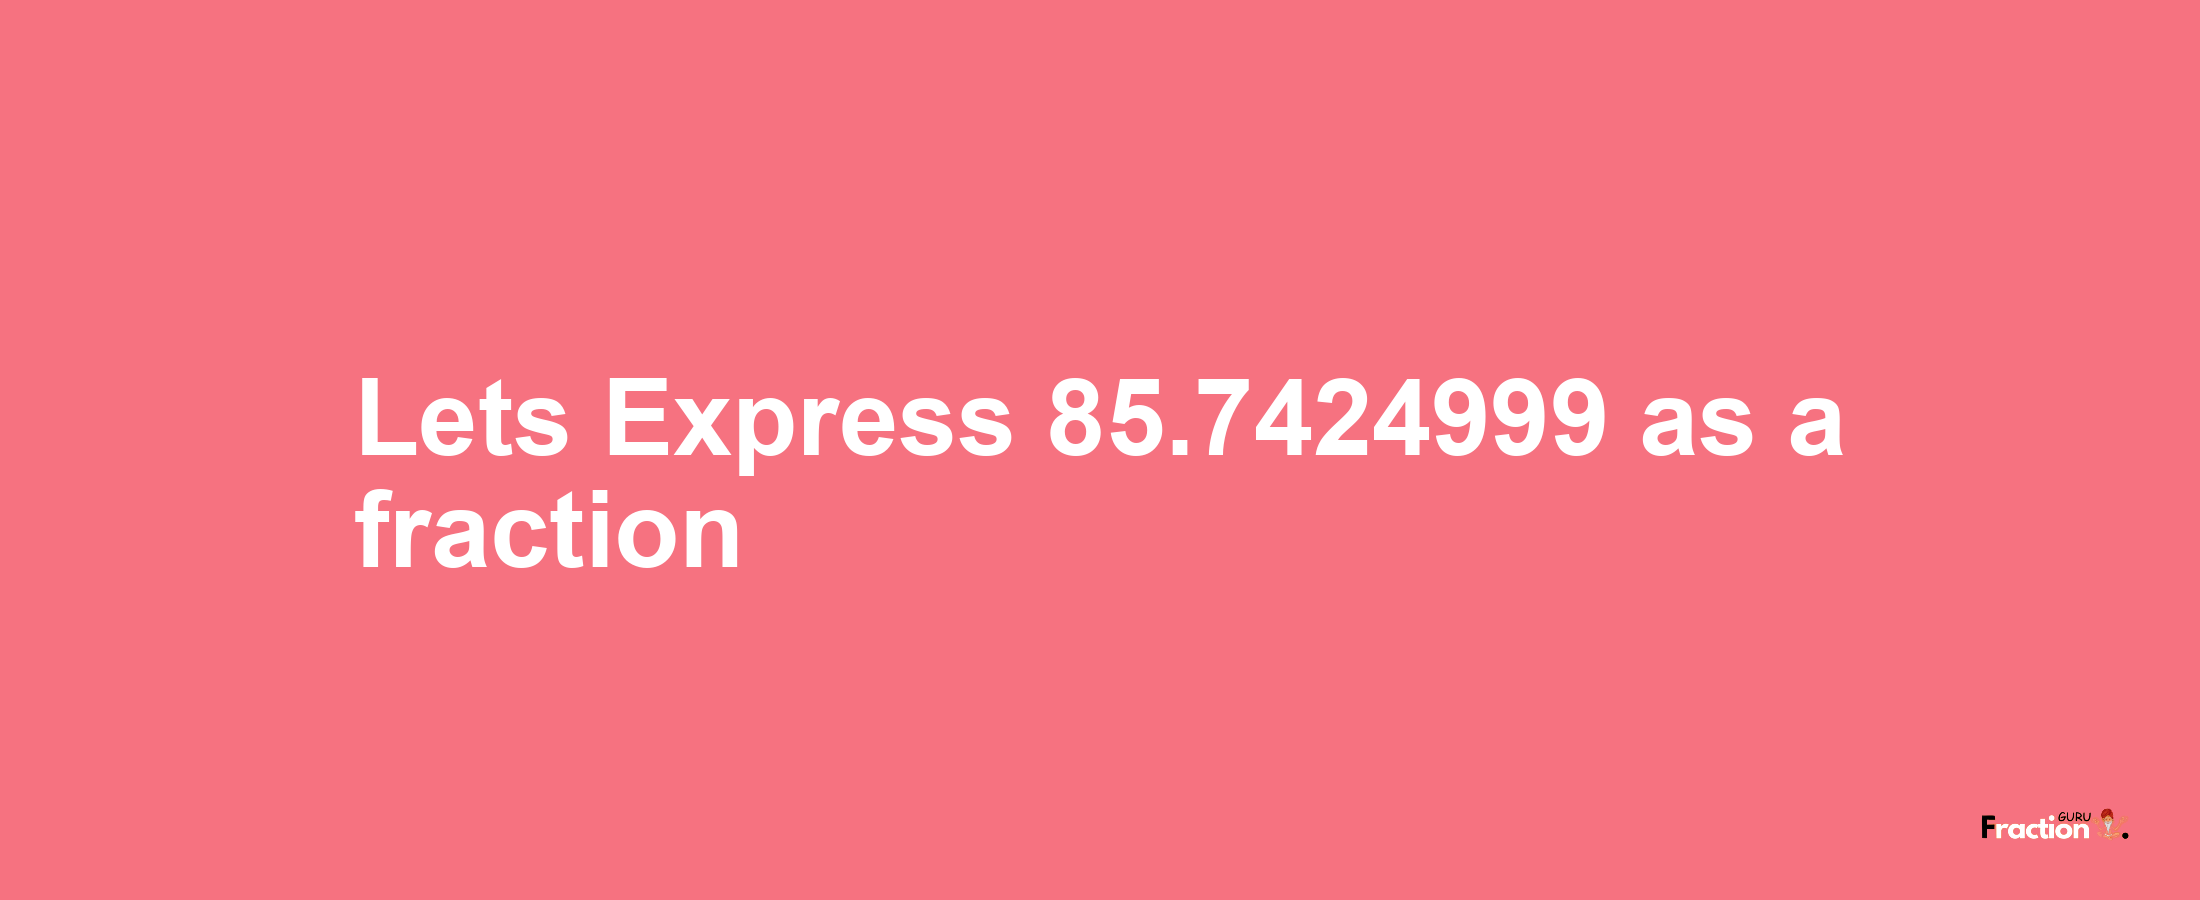 Lets Express 85.7424999 as afraction